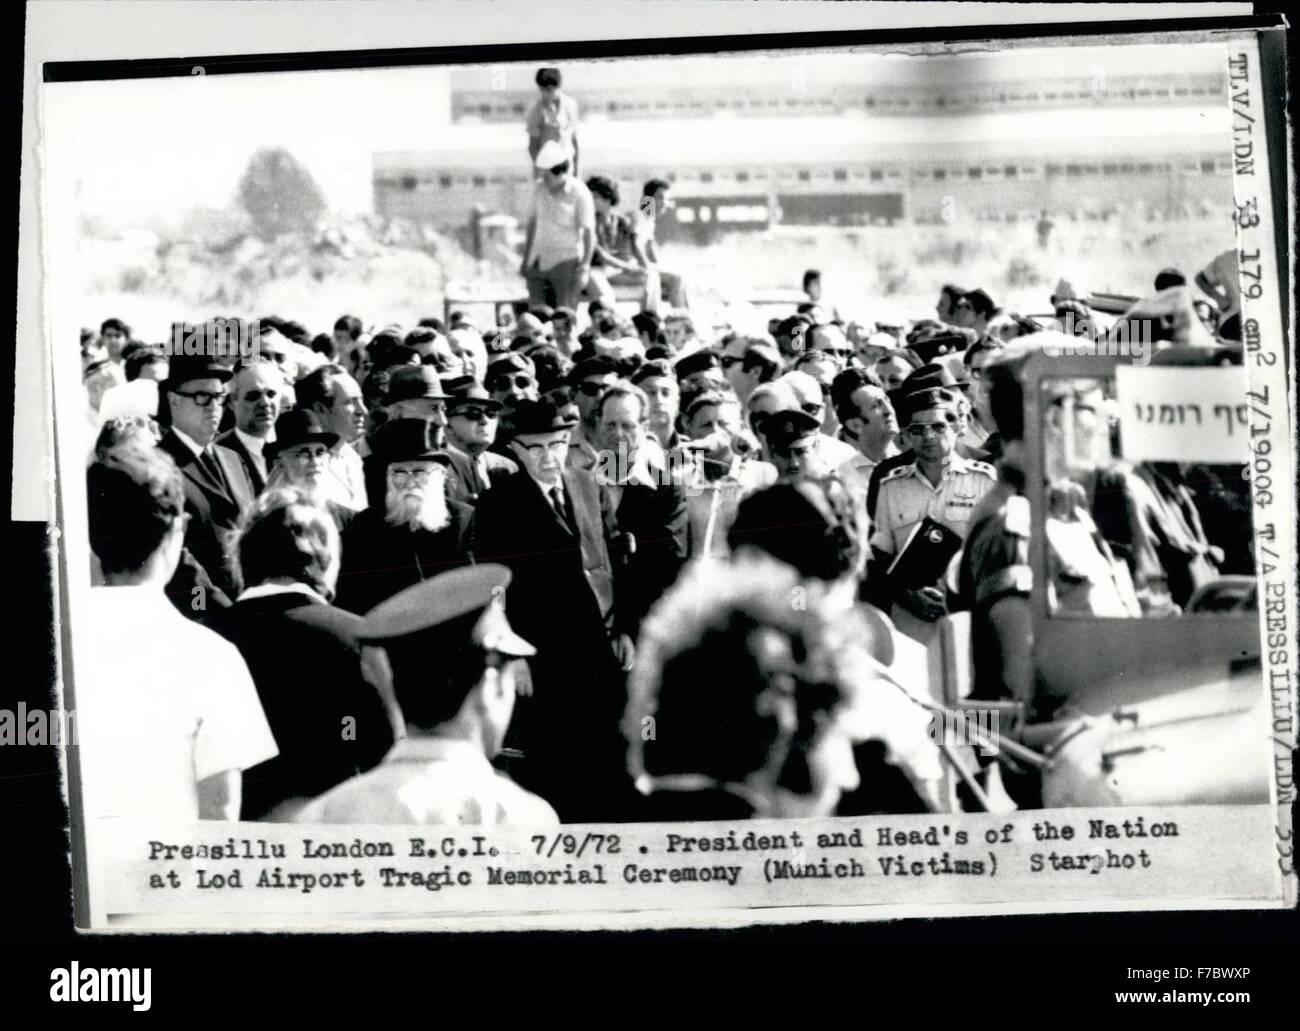 1972 - Bodies Of Victims Of Olympic Massacre Flown Home To Israeli: Photo Shows:- The President of Israel and other officials, pictured at Lydda Airport where a service was held after the arrival from Munich of the bodies of the victims of 10 Israeli victims of the Munich Olympic massacre. President and Head's of the Nation at Lod Airport Tragic Memorial Ceremony (Munich Victims) © Keystone Pictures USA/ZUMAPRESS.com/Alamy Live News Stock Photo